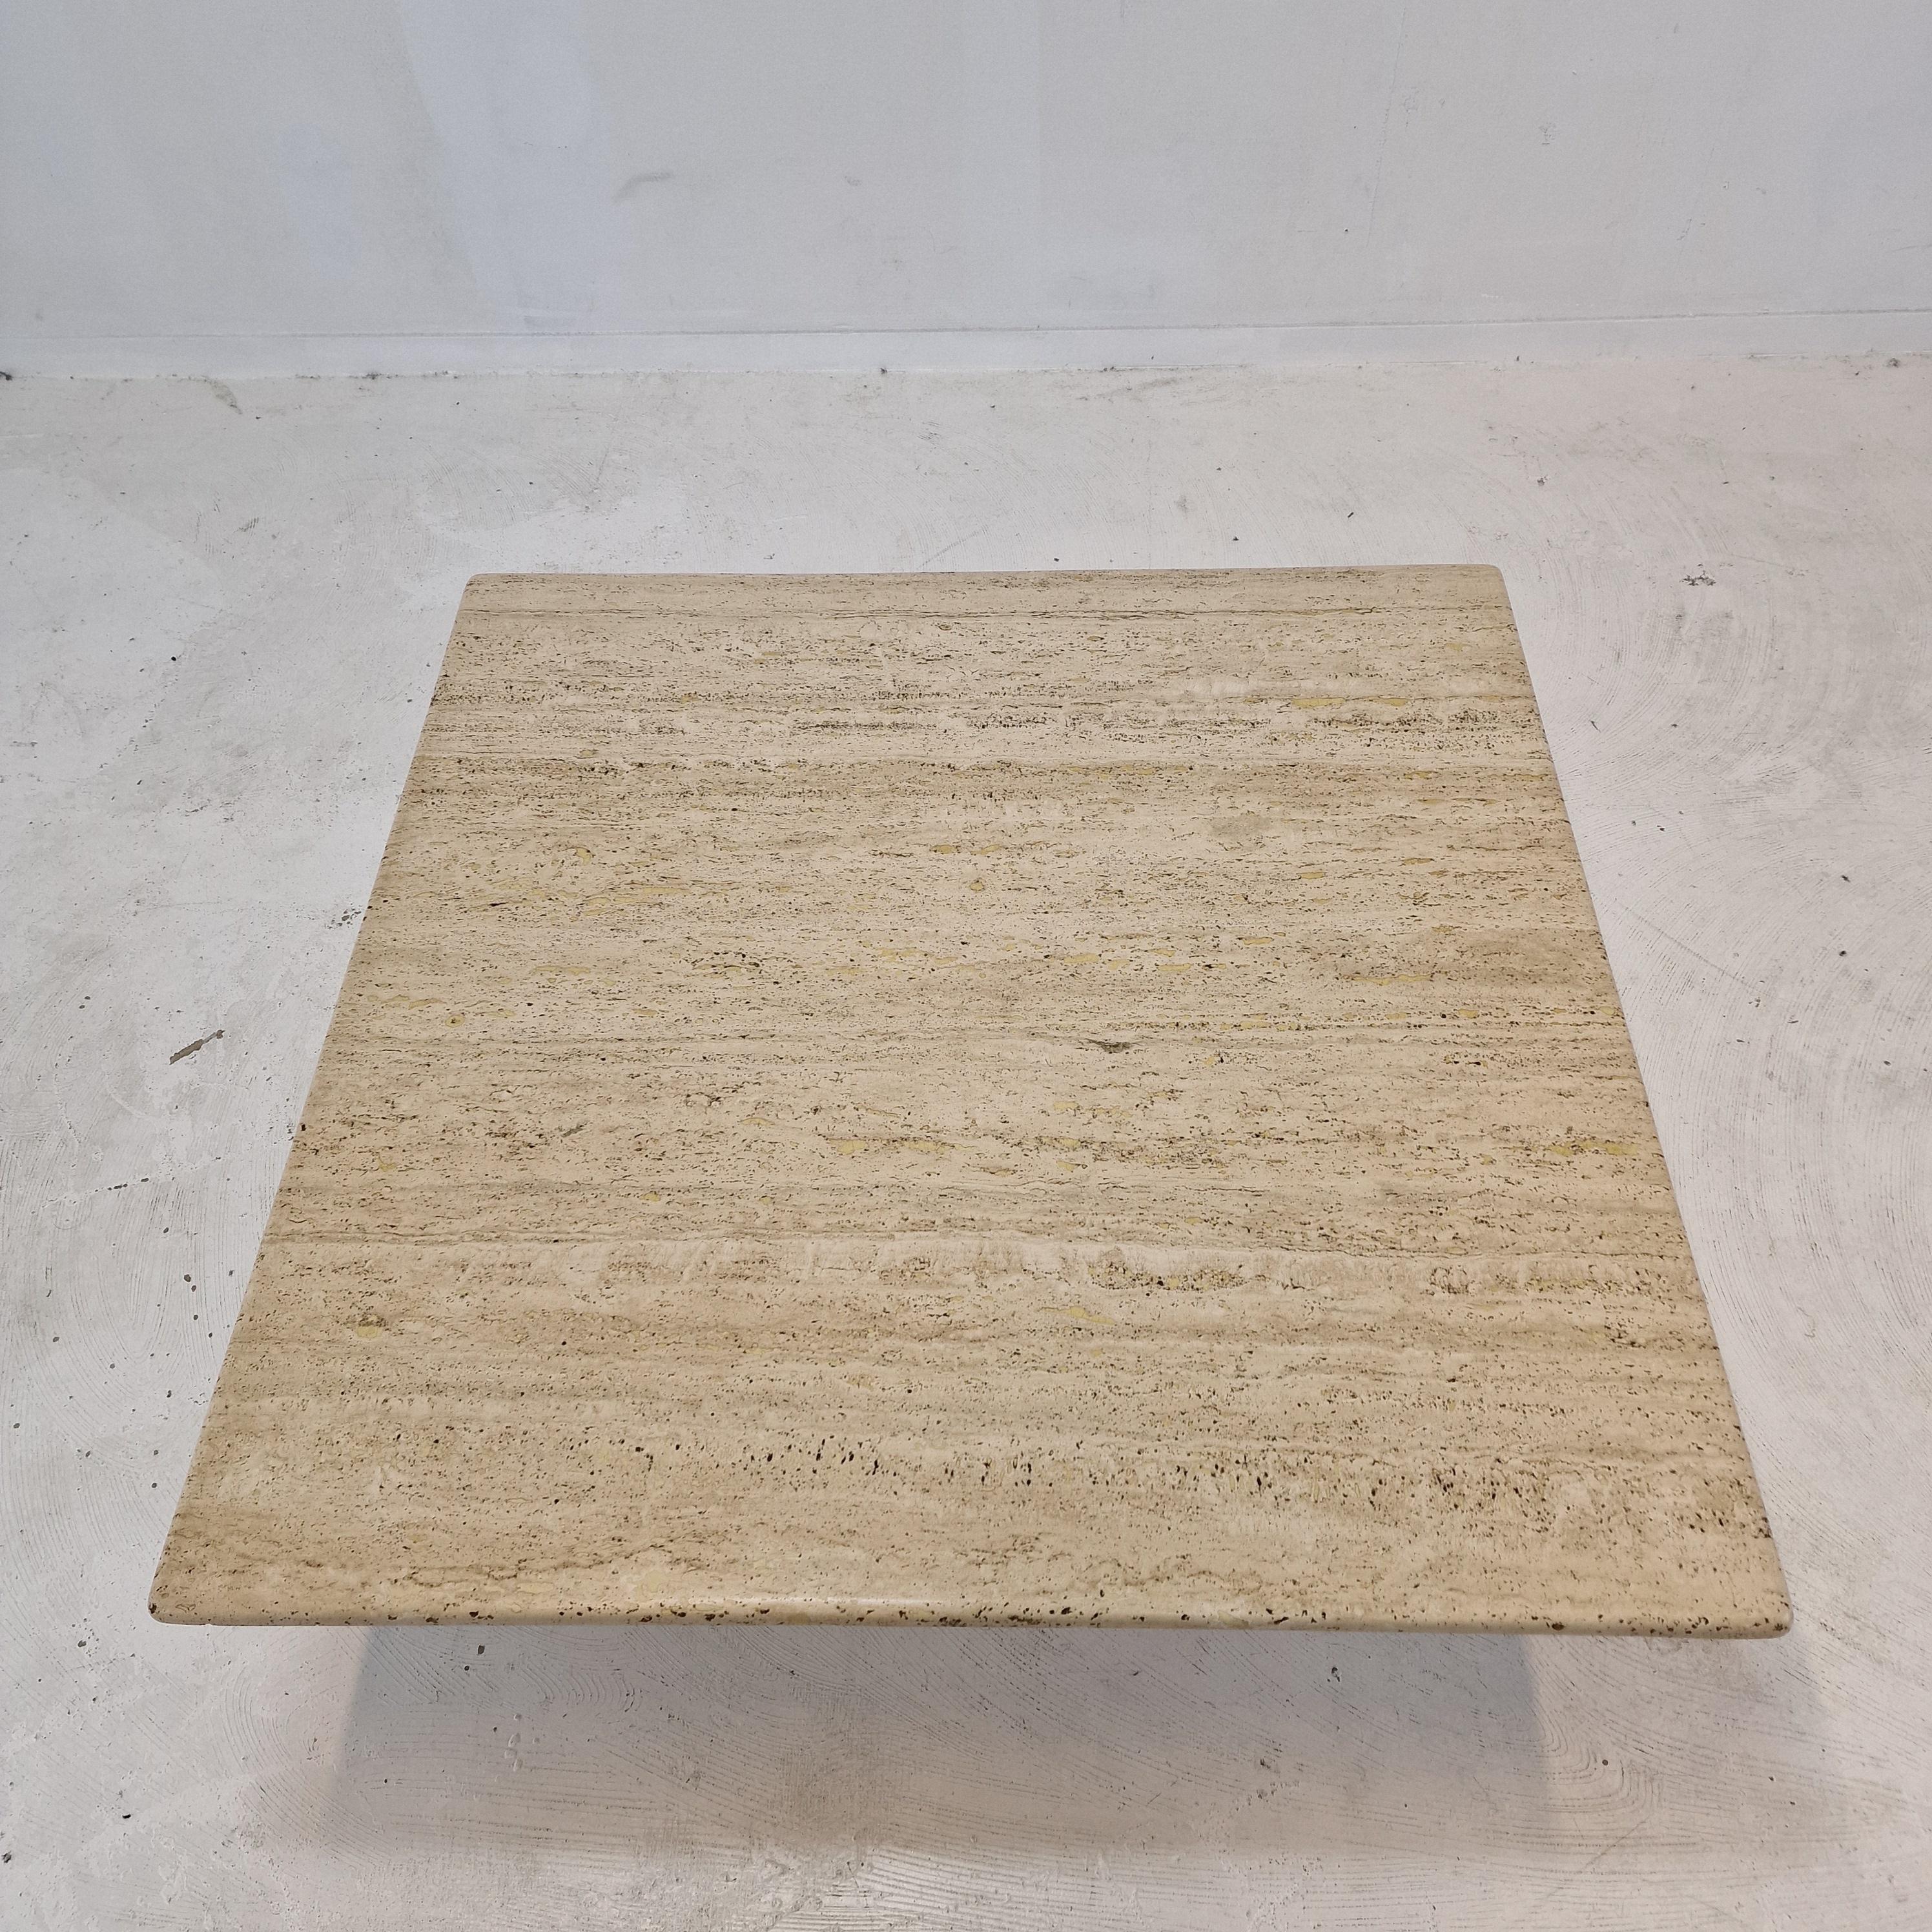 Late 20th Century Italian Square Coffee Table in Travertine, 1980s For Sale